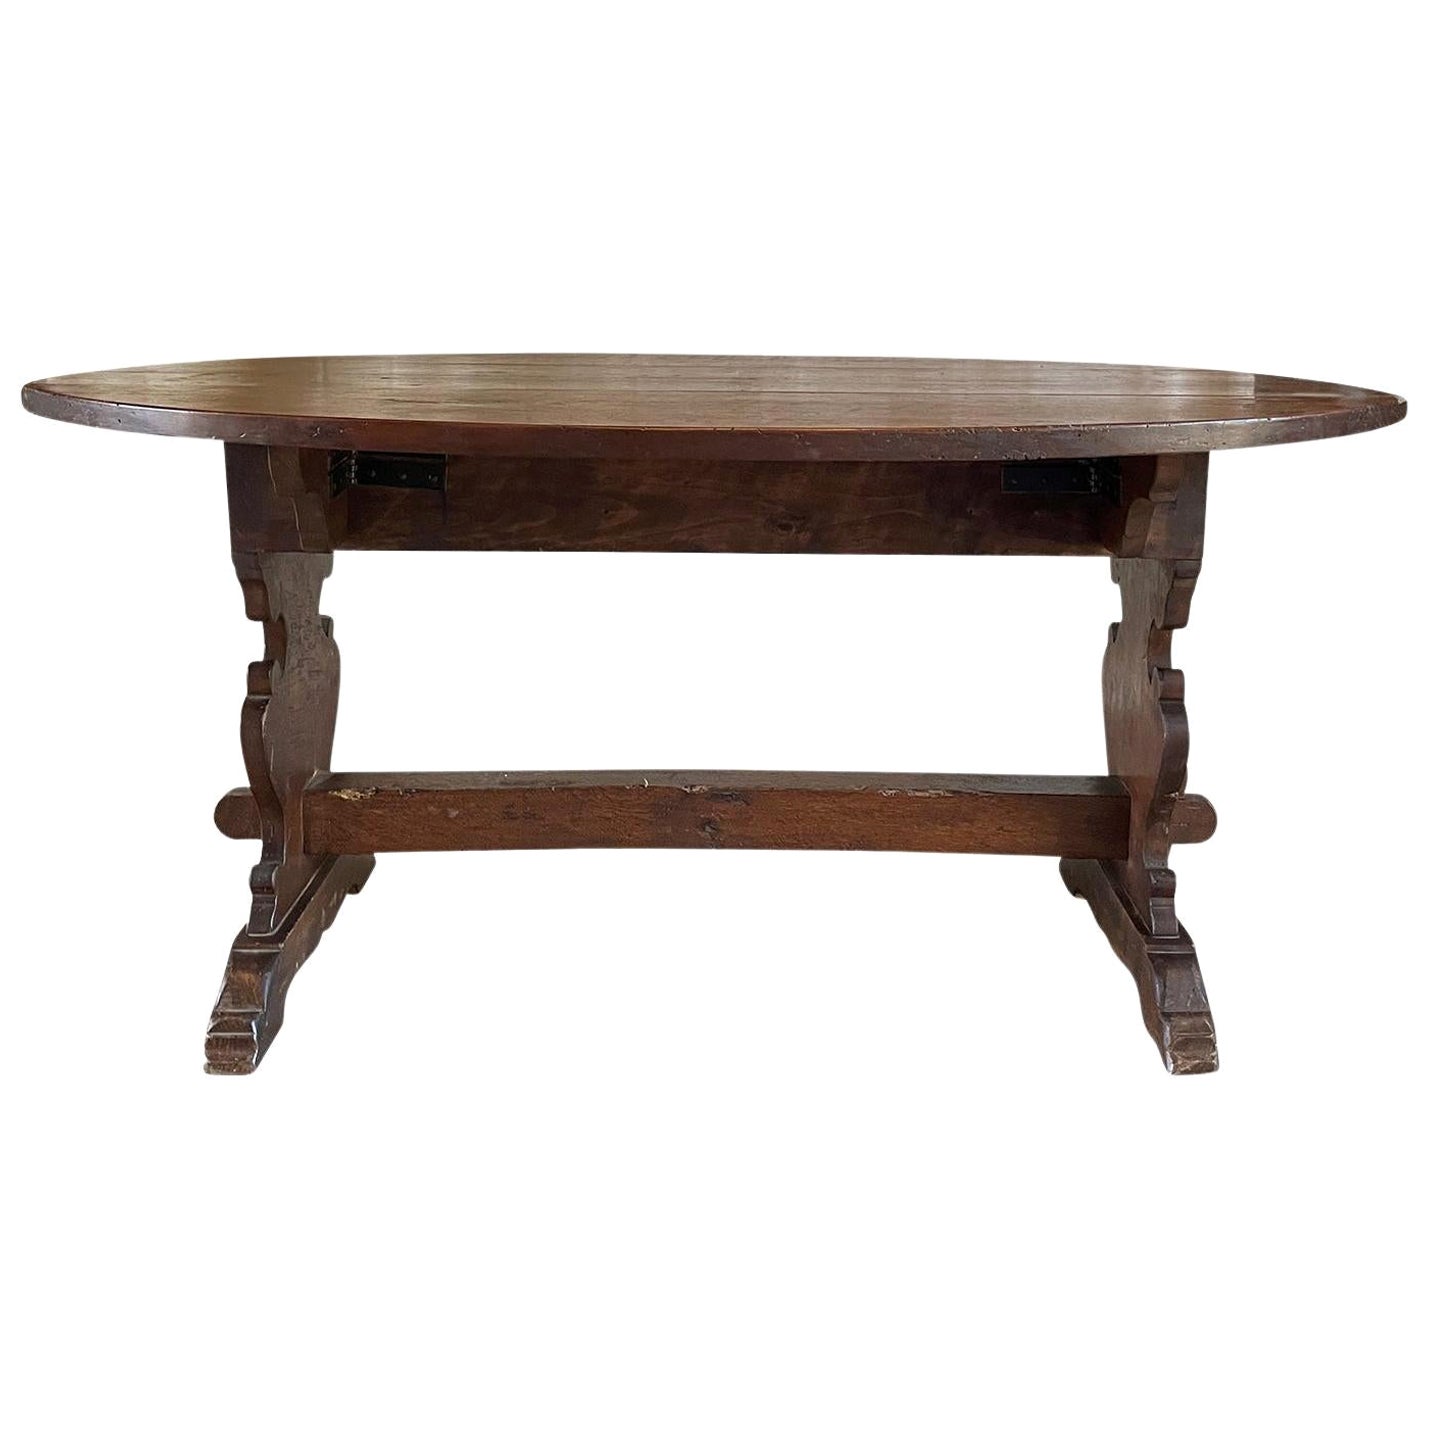 19th Century Italian Antique Oval Drop Leaf Table, Tuscan Dining Room Table